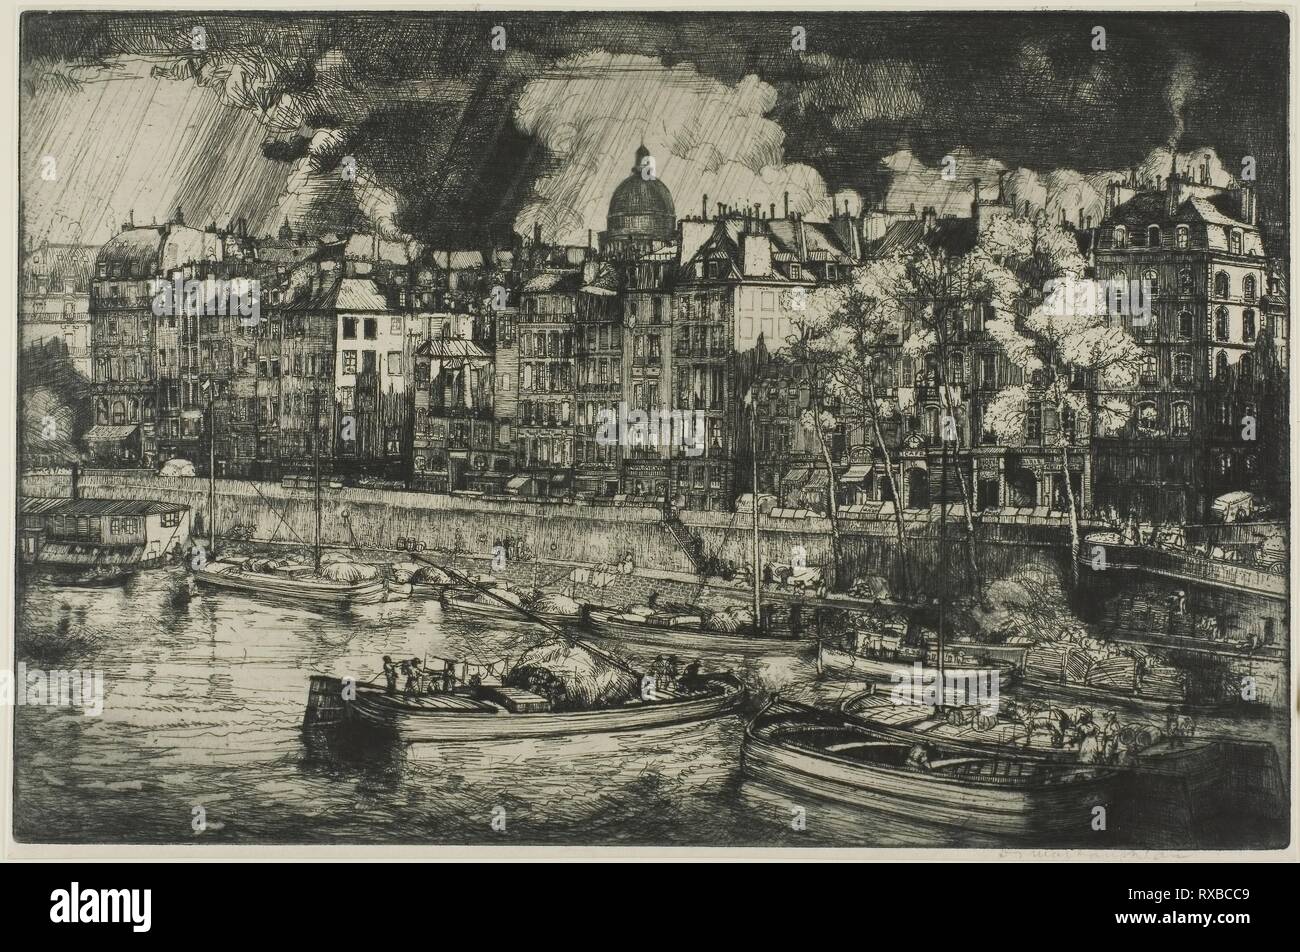 Quai des Grands Augustins, Paris. Donald Shaw MacLaughlan; American, 1876-1938. Date: 1906. Dimensions: 210 x 270 mm (image); 260 x 305 mm (sheet). Etching in black on ivory wove paper. Origin: United States. Museum: The Chicago Art Institute. Stock Photo